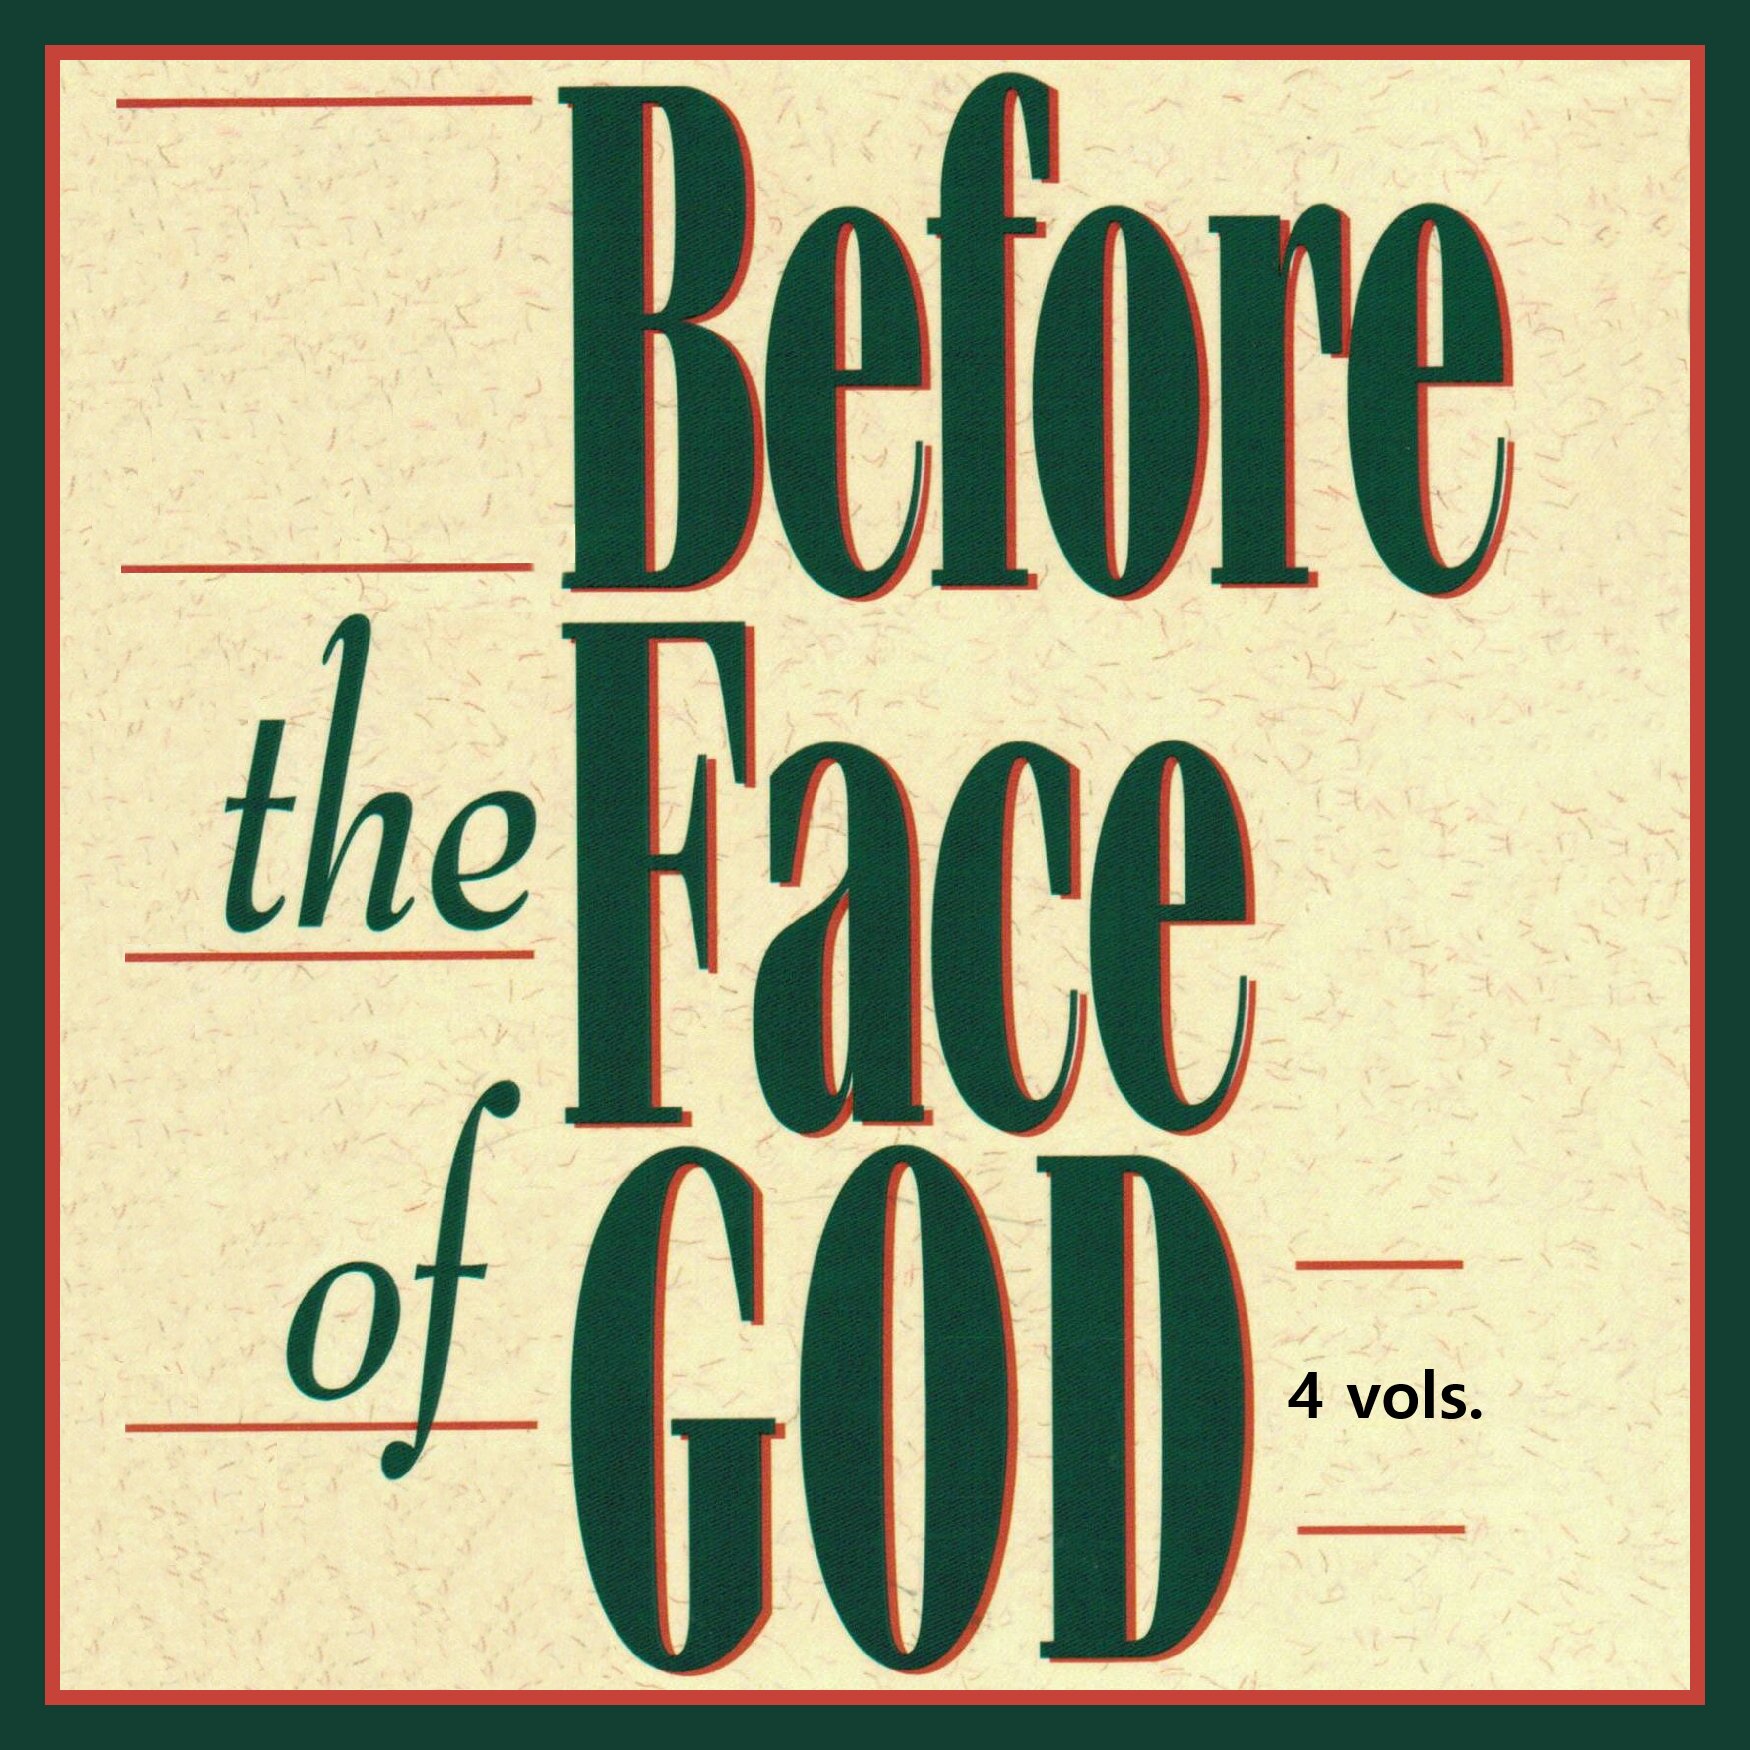 Before the Face of God, Books 1 through 4 (4 vols.)